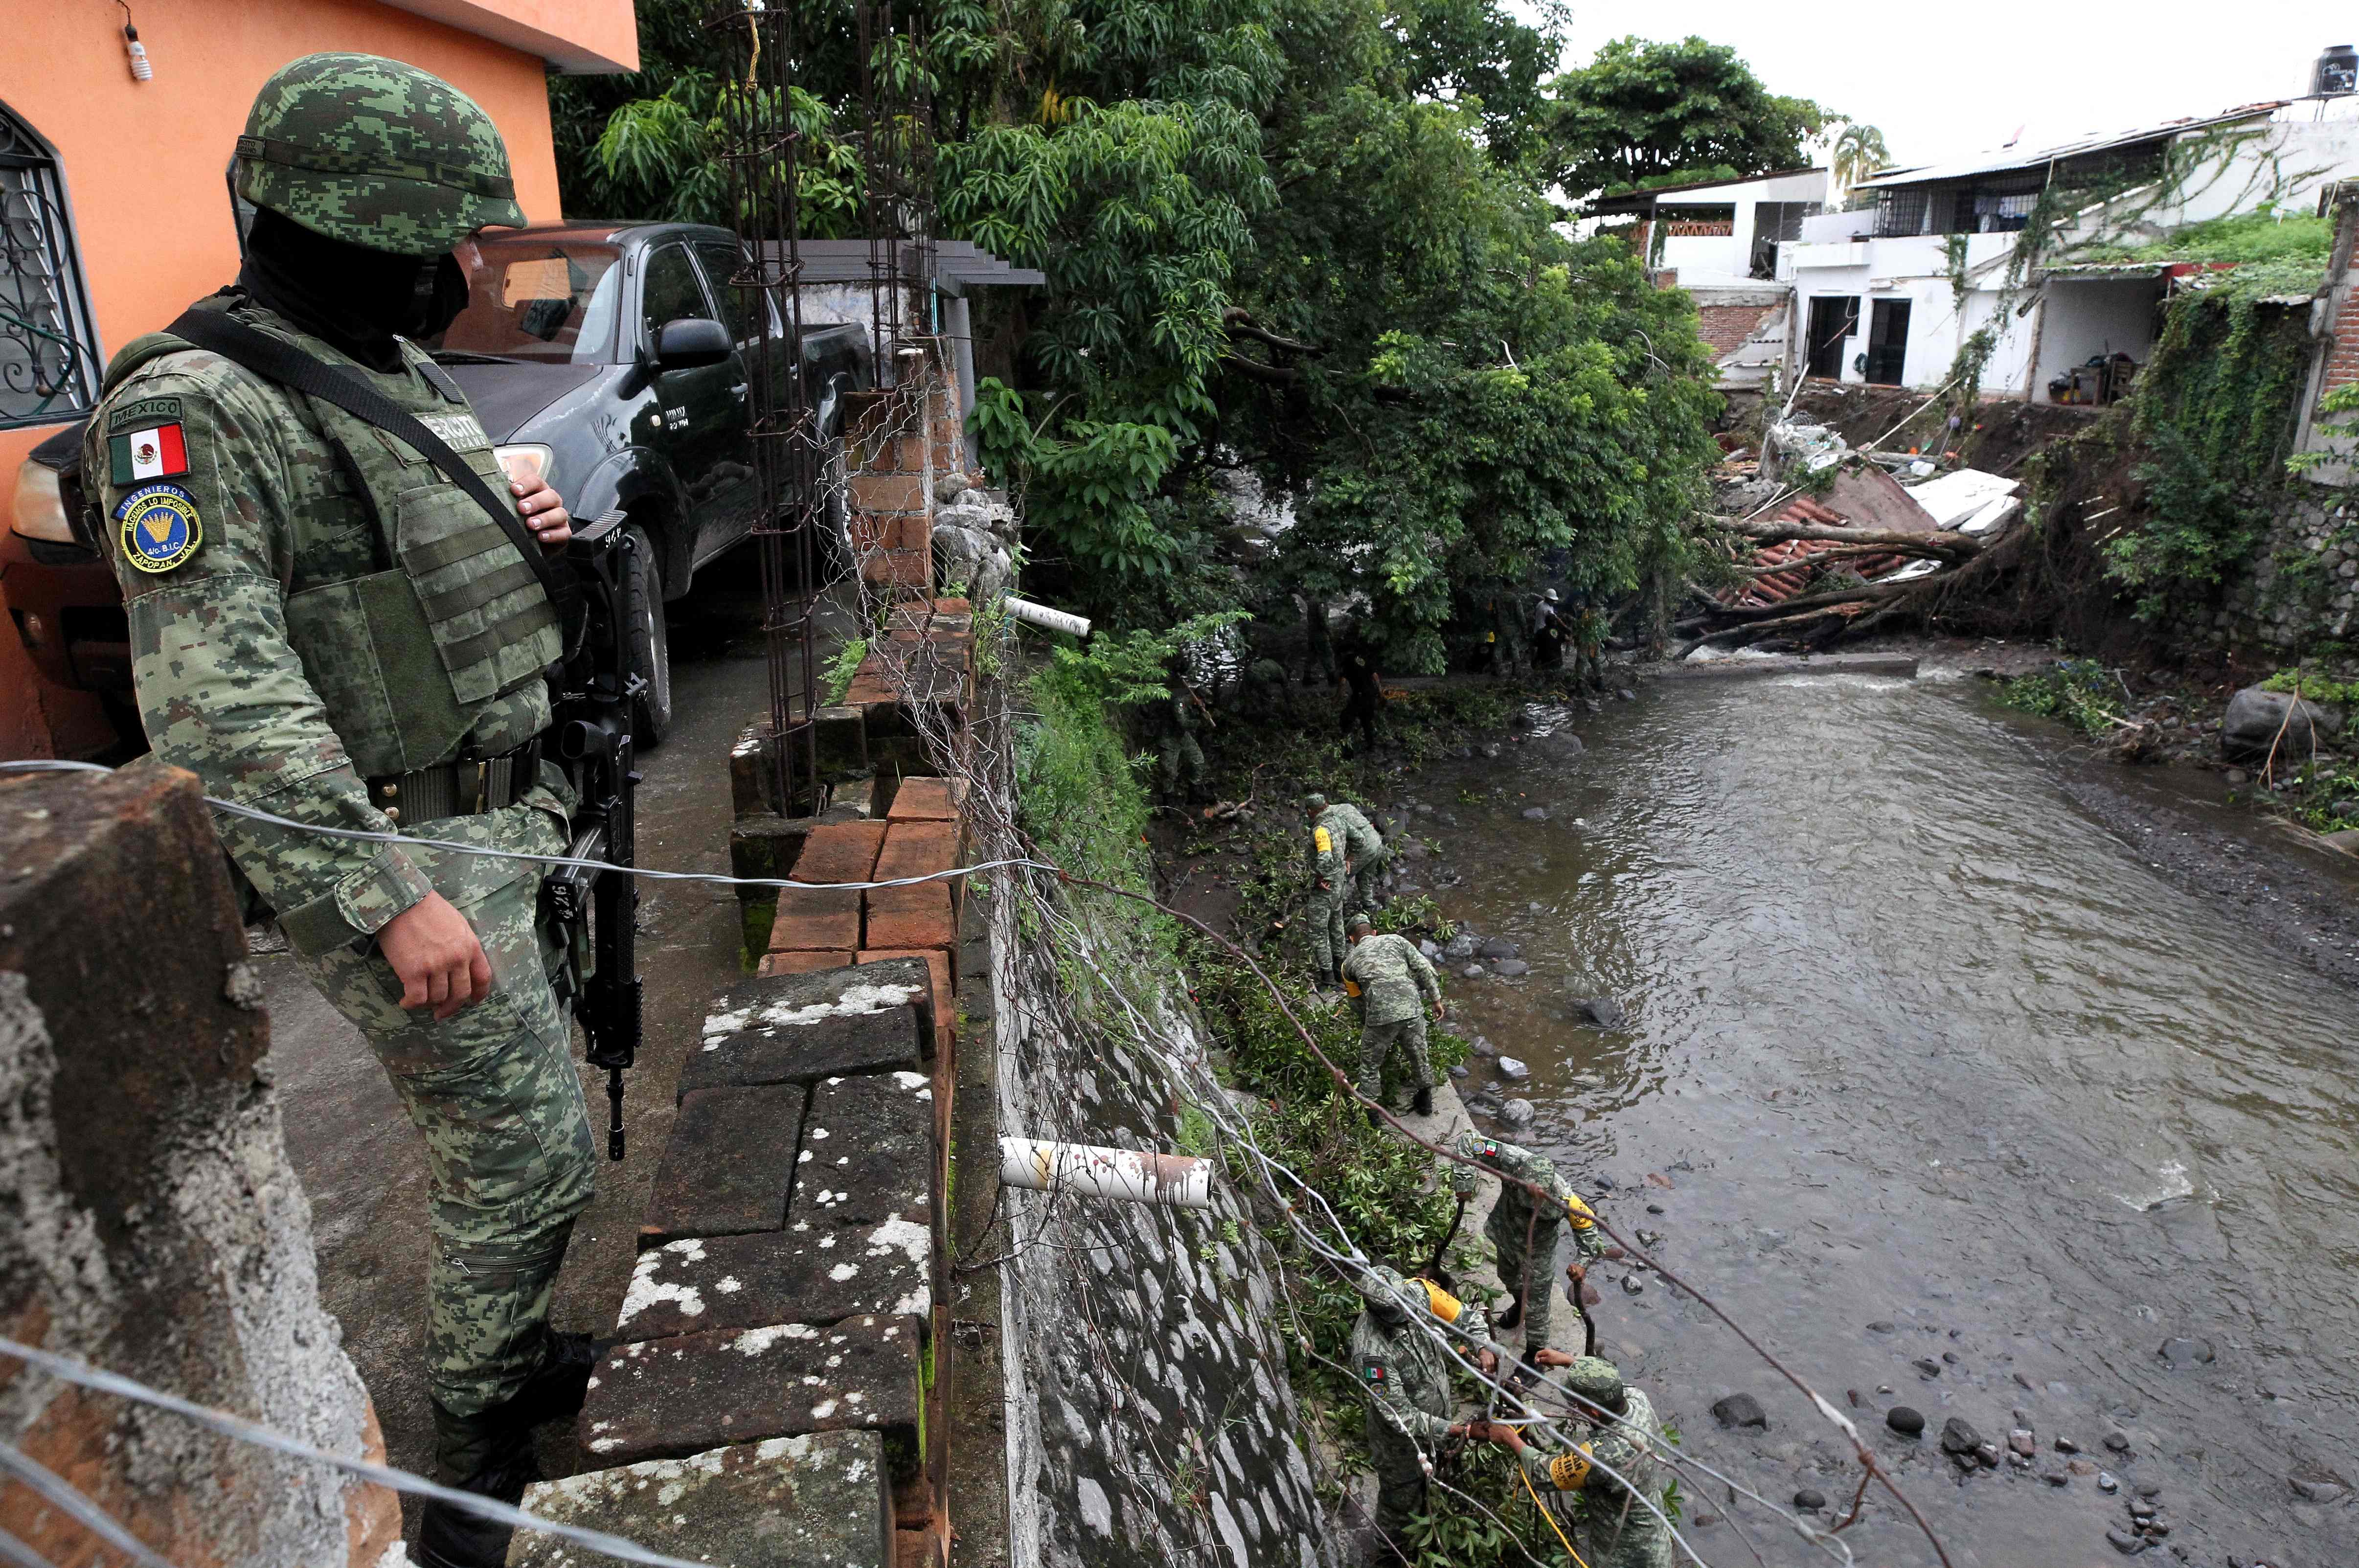 Soldiers and members of civil defence work to unblock access to three houses that collapsed after yesterday's earthquake in Colima, state of Colima, Mexico, on September 20, 2022